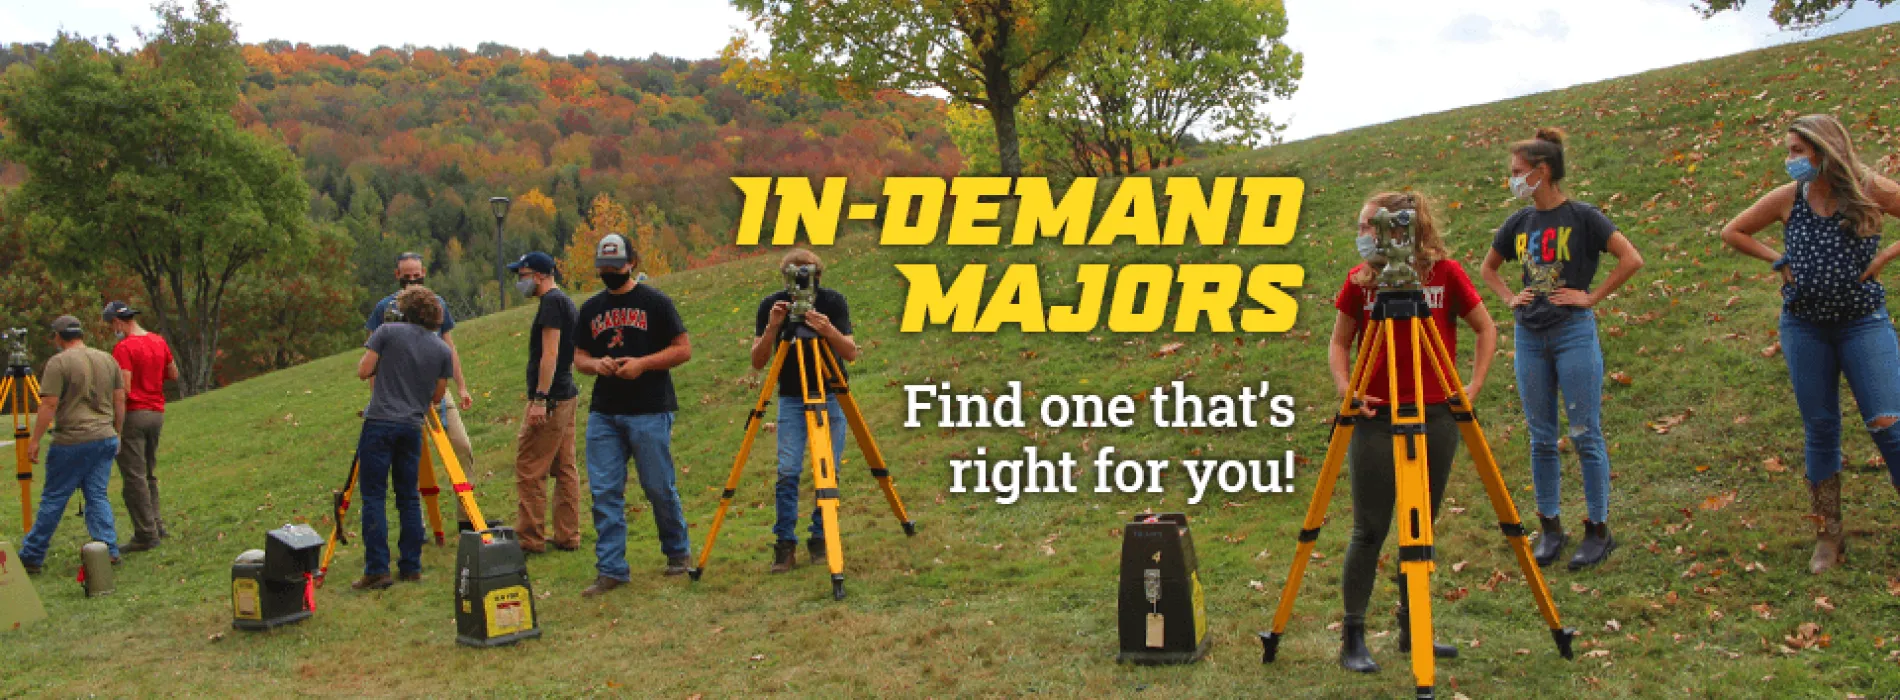 Link to majors page. Image of surveying students in lab outdoors with survey equipment in the fall foliage. In-demand majors. Find one that's right for you.